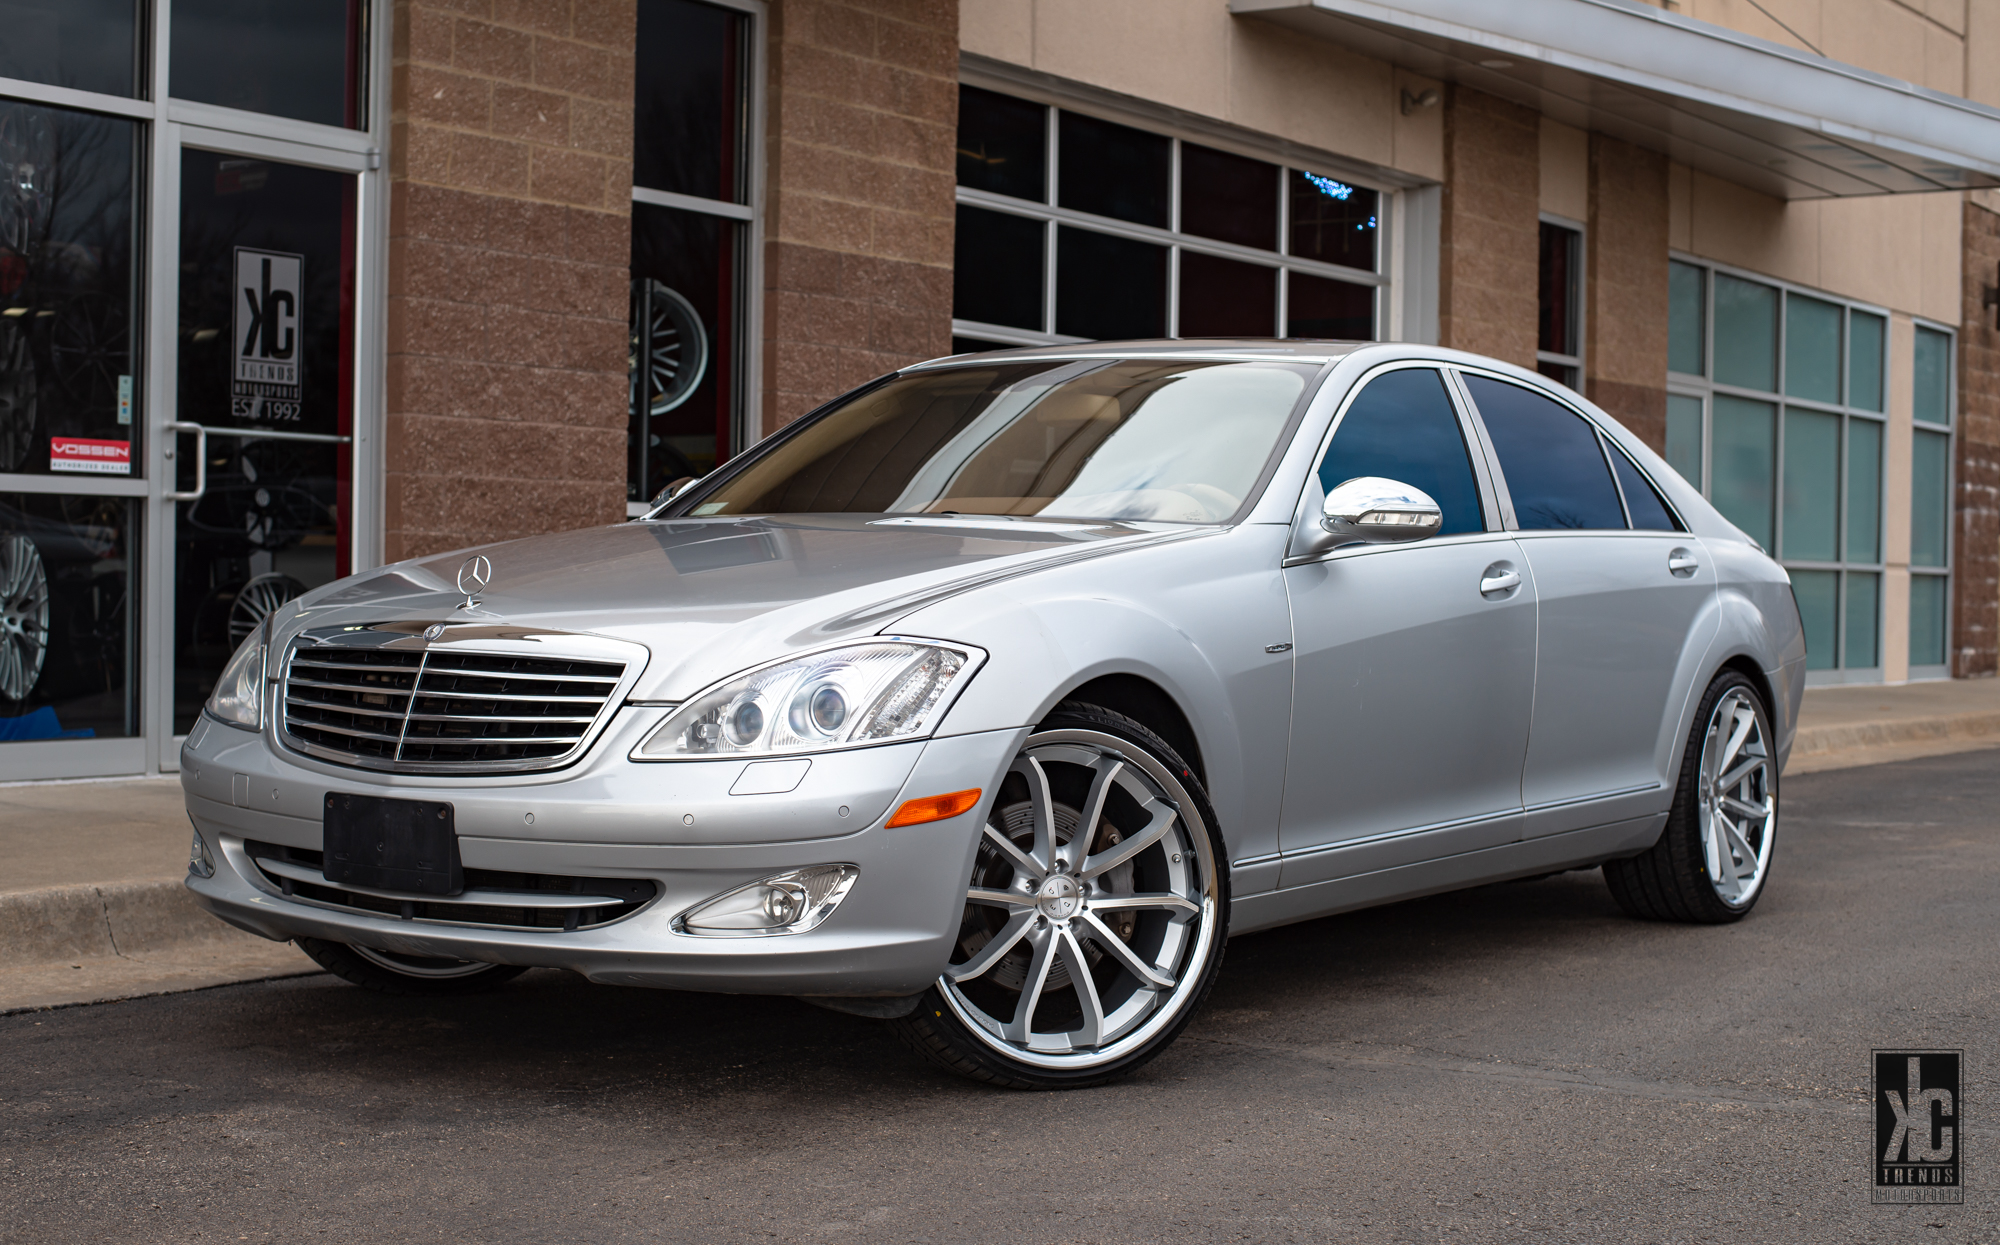  Mercedes-Benz S500 with 